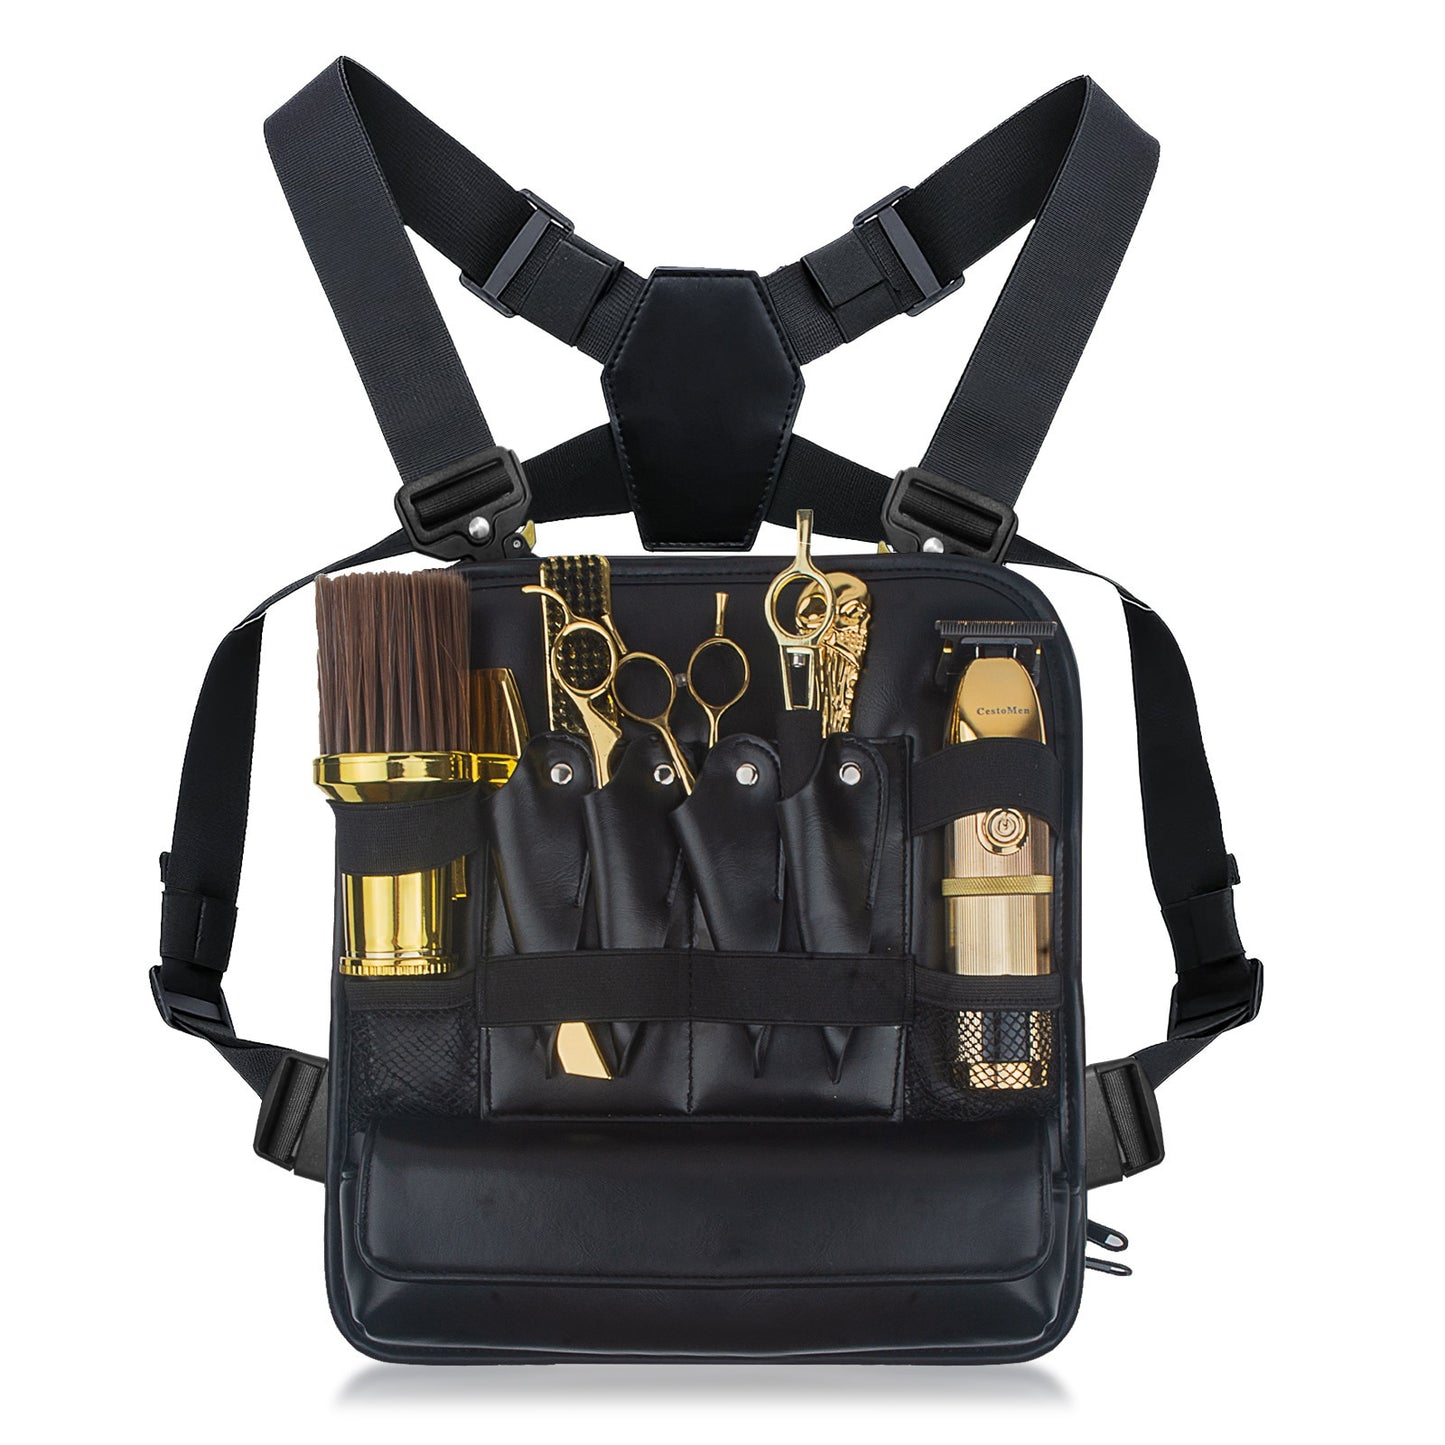 NEWEST Leather Fashionable Functional Chest Rigs Bag - HAB - Hair And Beauty